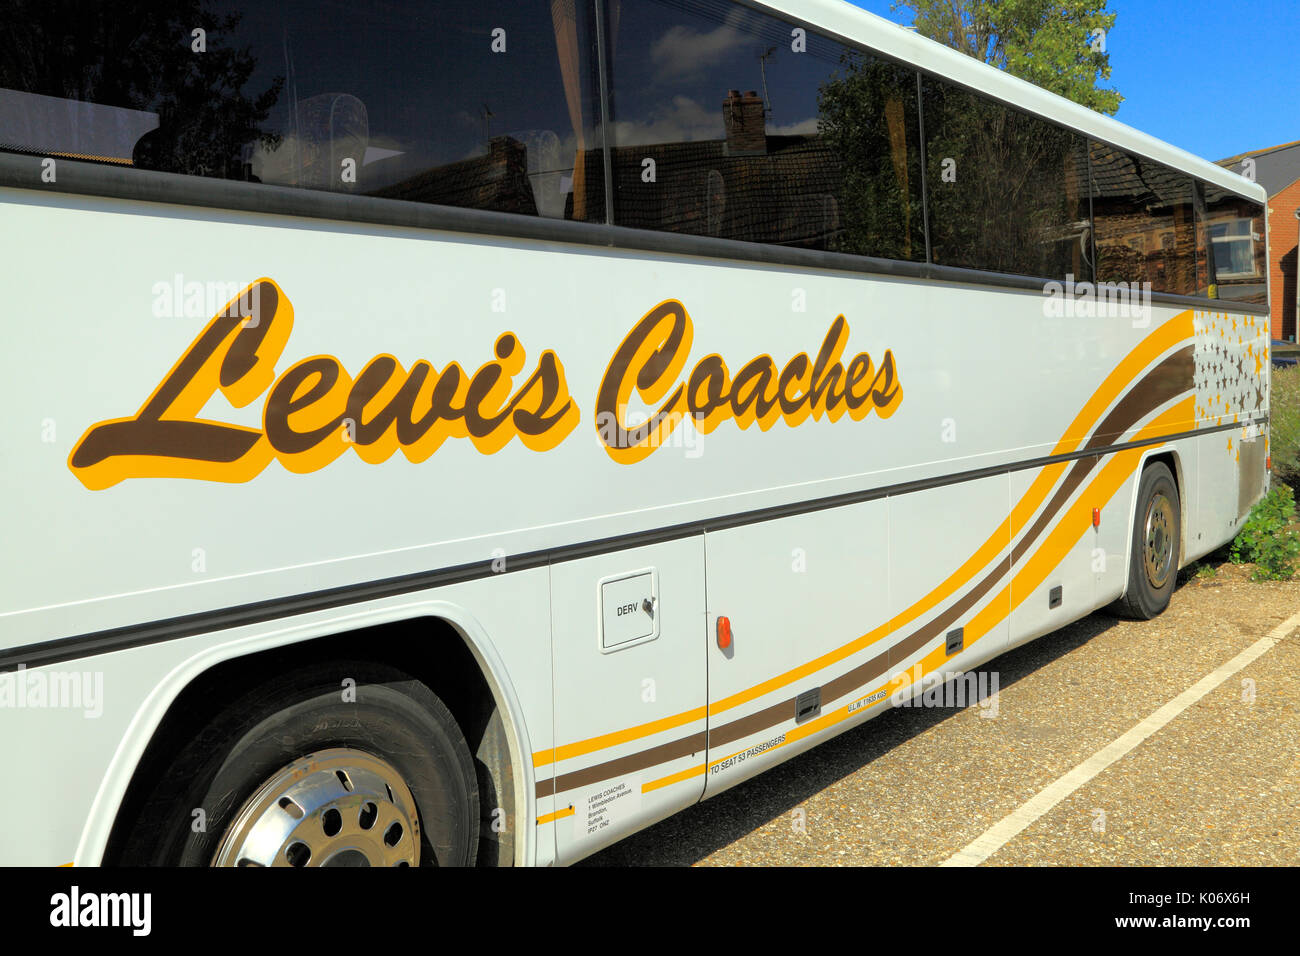 Lewis Coaches, coach, Executive Travel, day trip, trips, excursion, excursions, travel company, companies, transport, holidays, England, UK Stock Photo